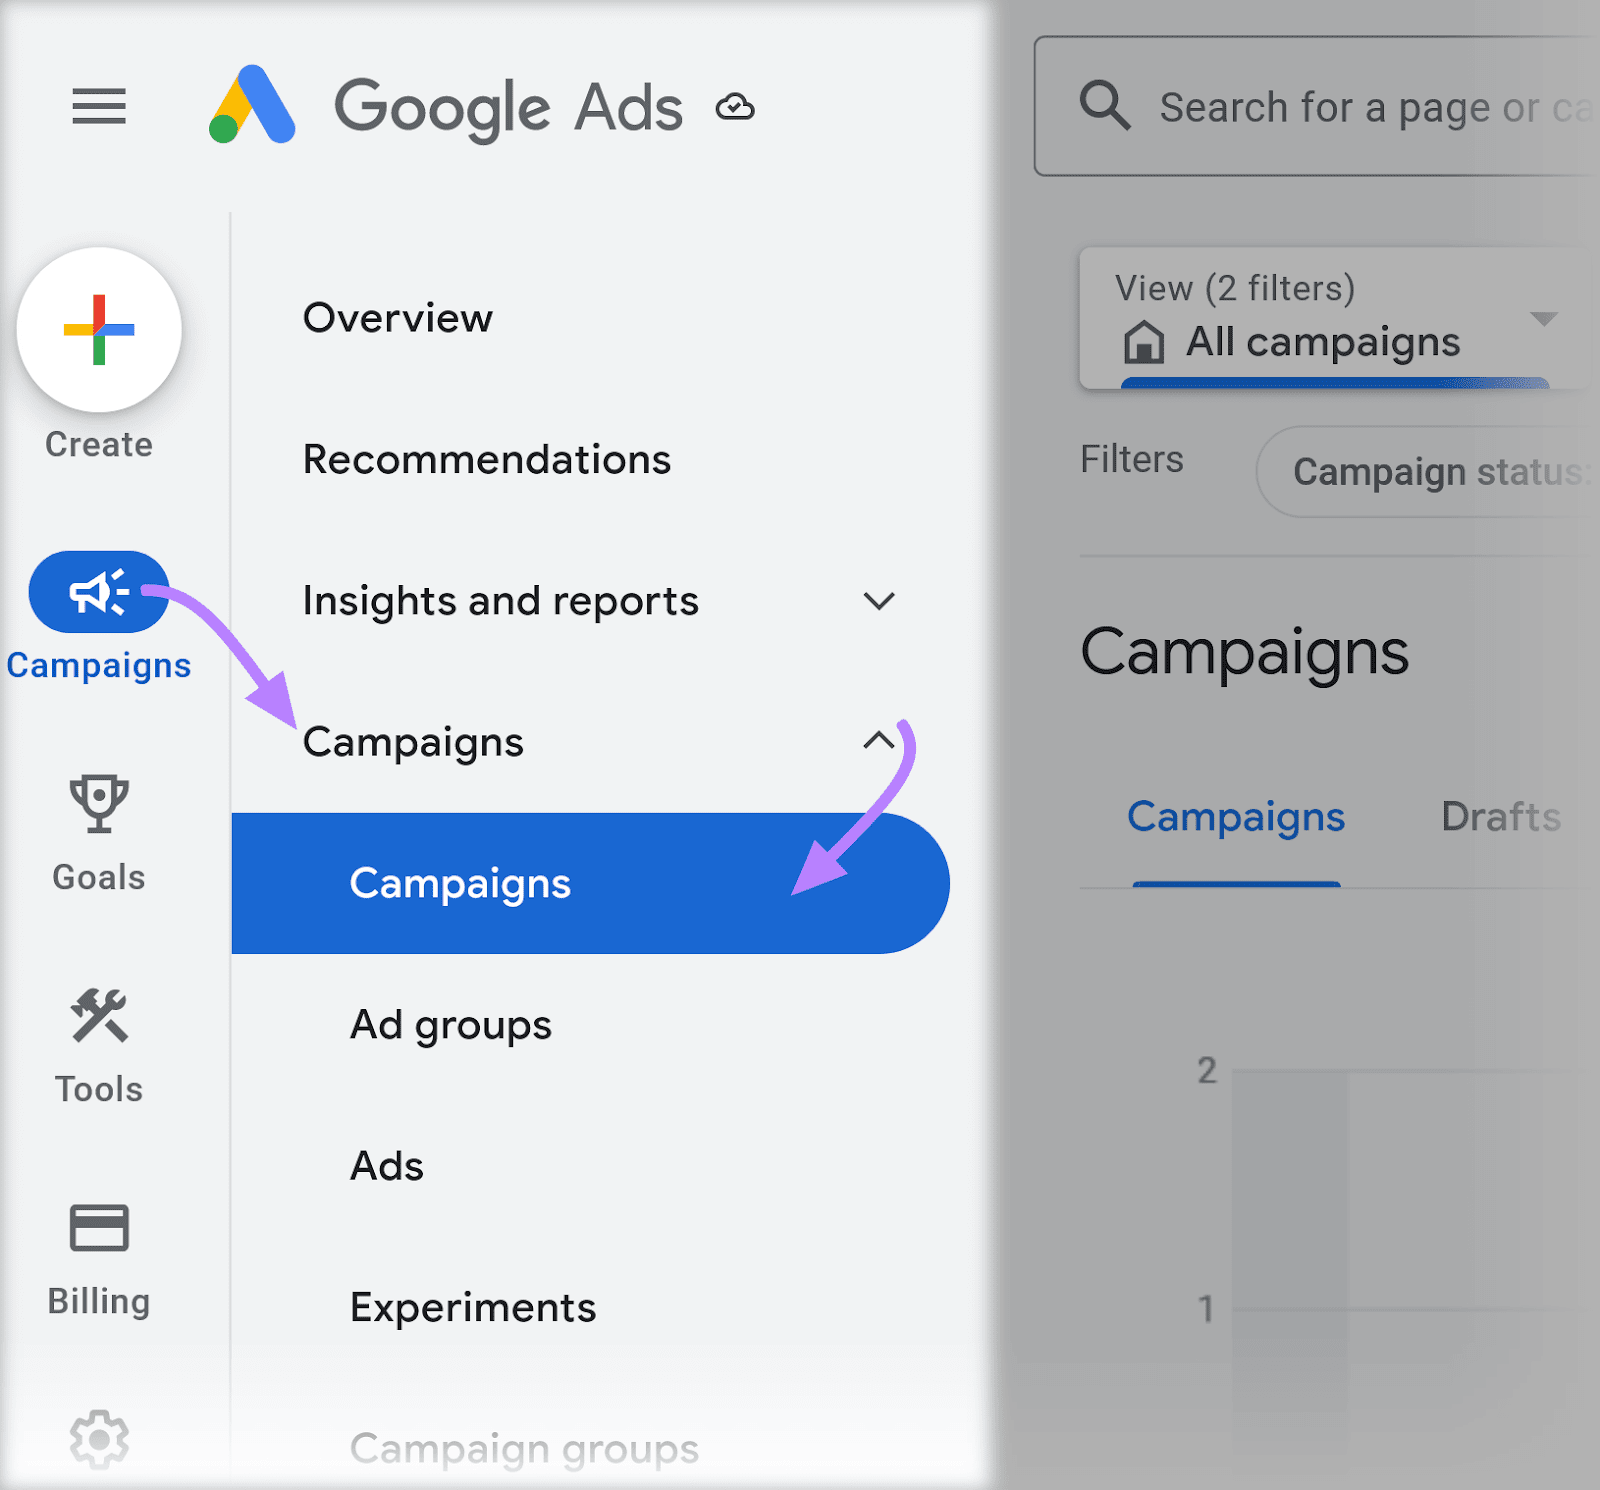 “Campaigns” in Google Ads account